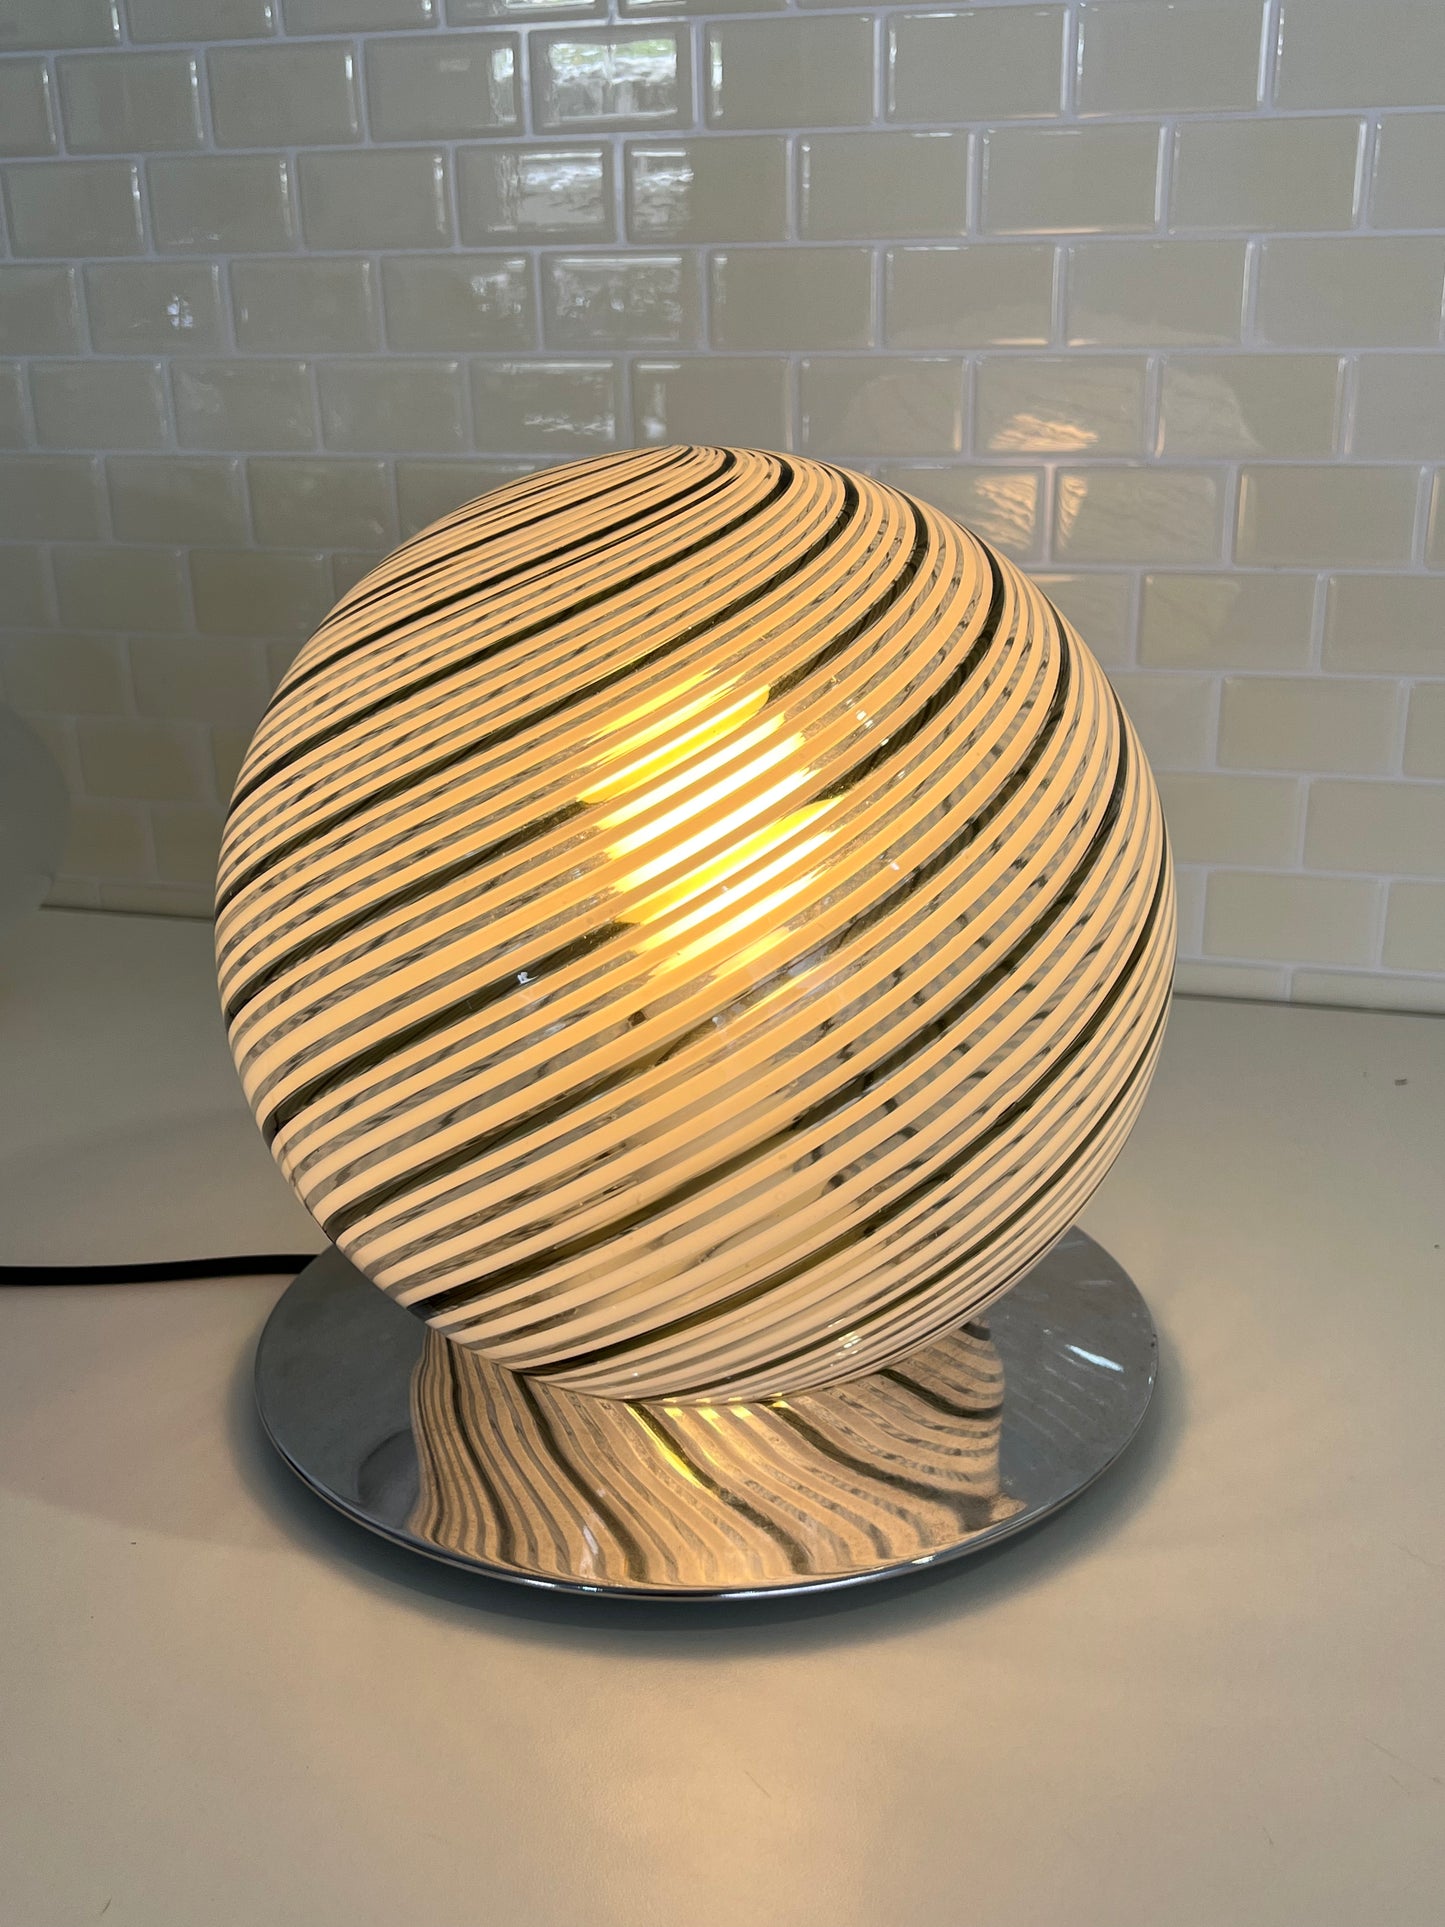 Spheric Murano Table Lamp by Tronconi with Chrome Base, 1970s